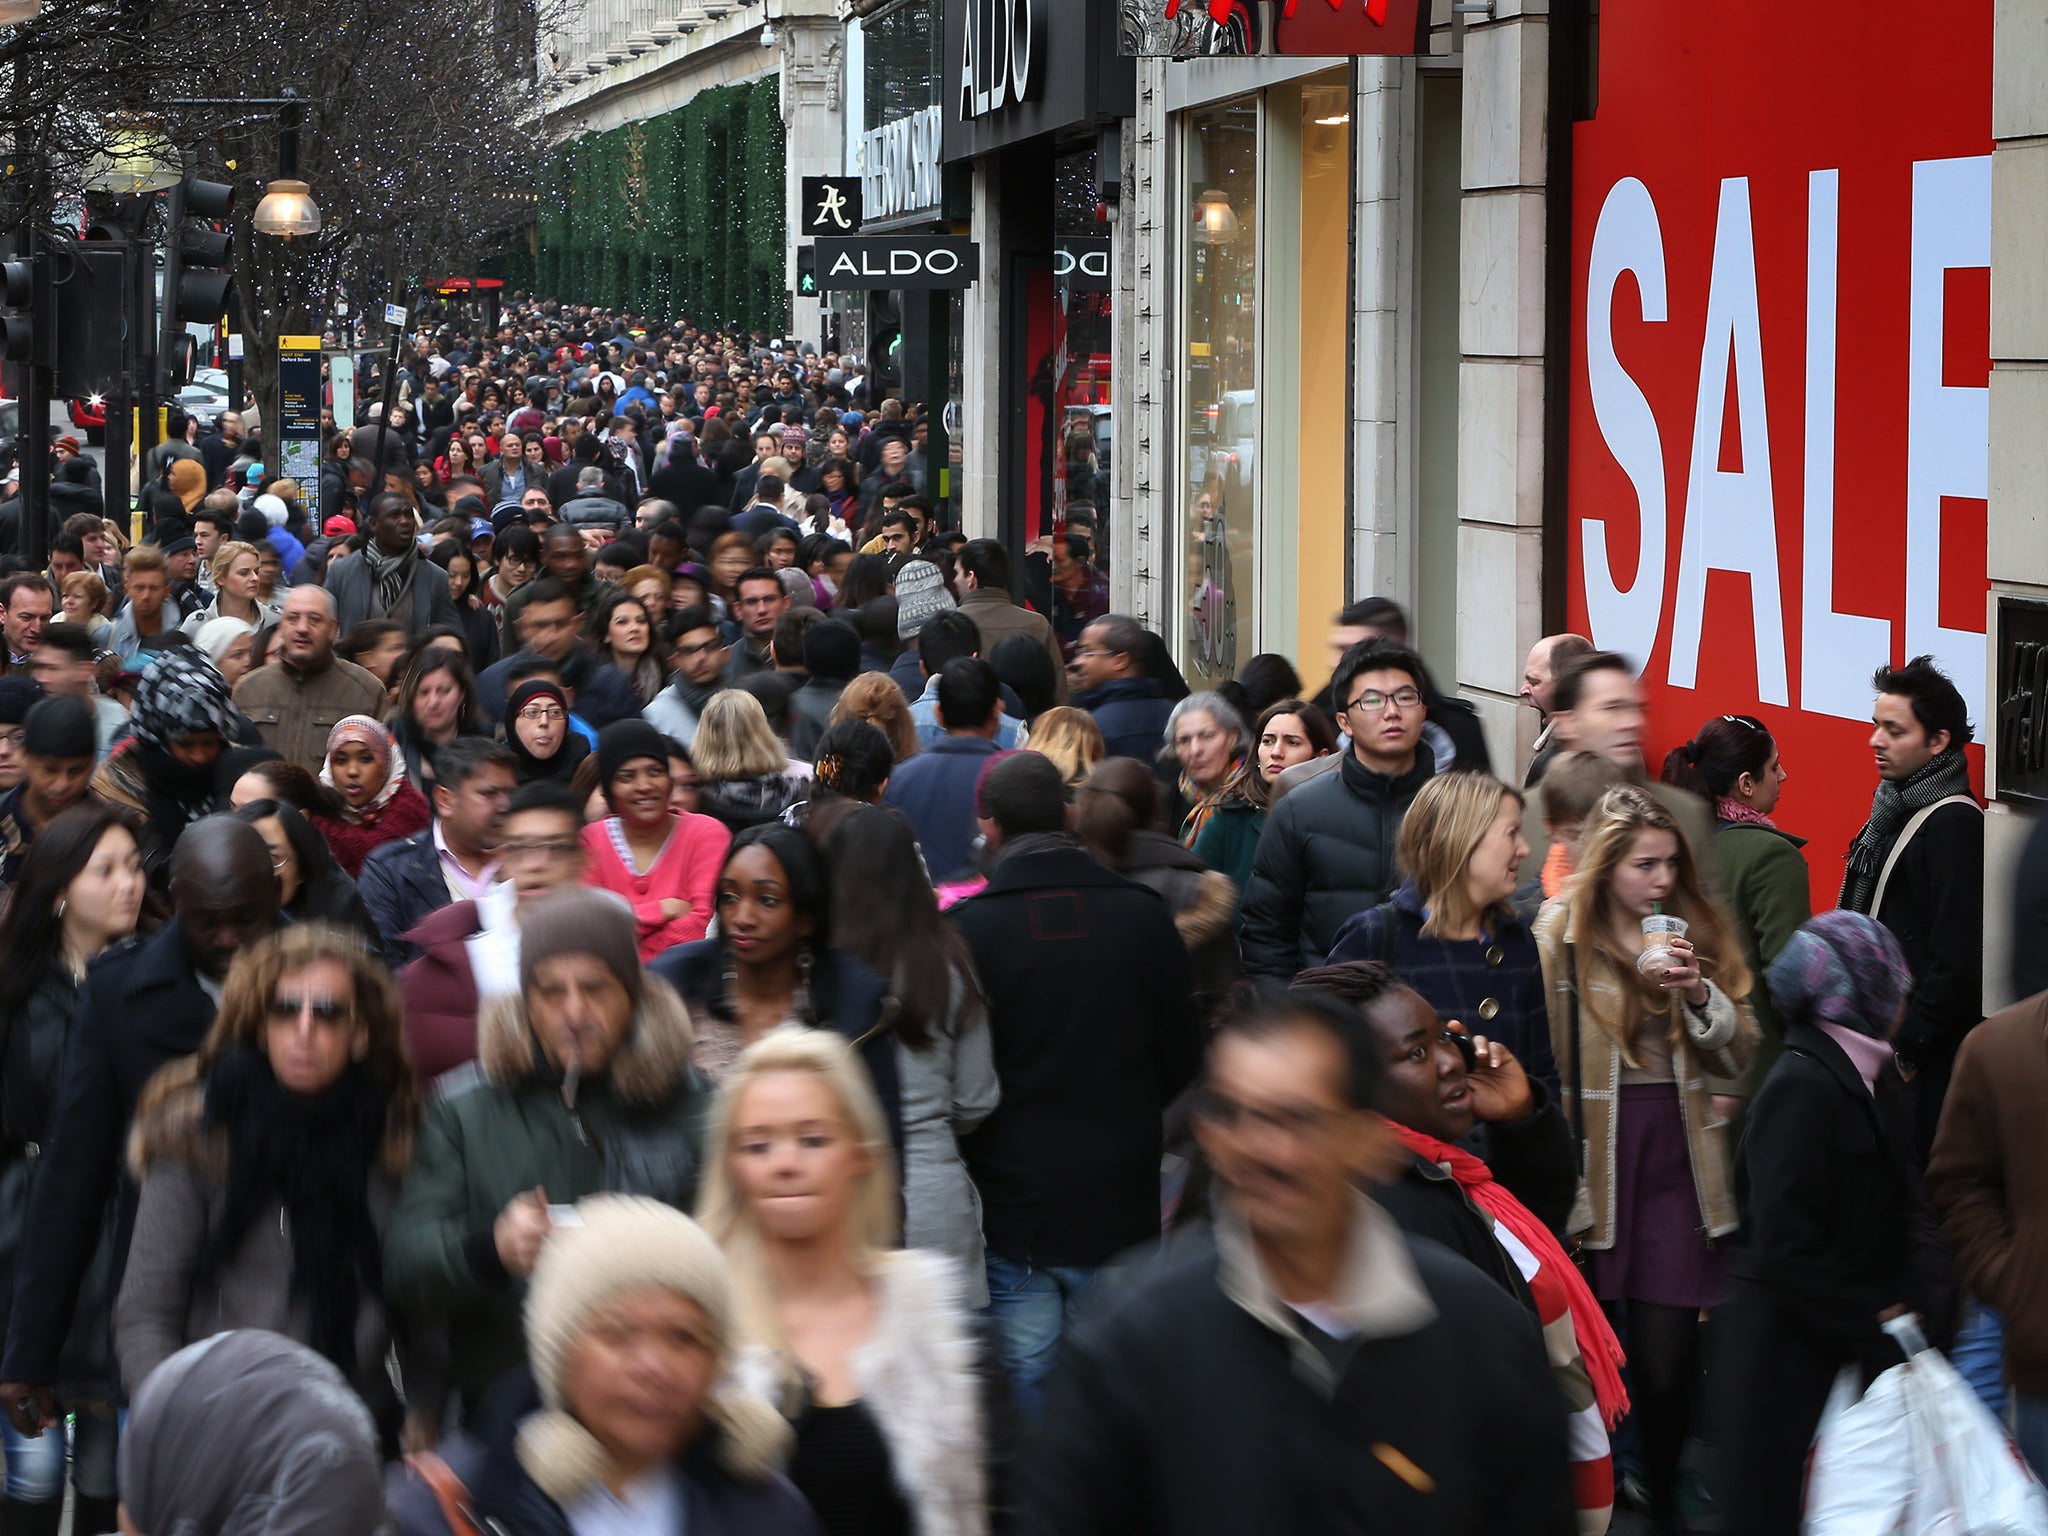 The UAE Ministry of Foreign Affairs said Oxford Street had high rates for fraud, theft and pickpocketing